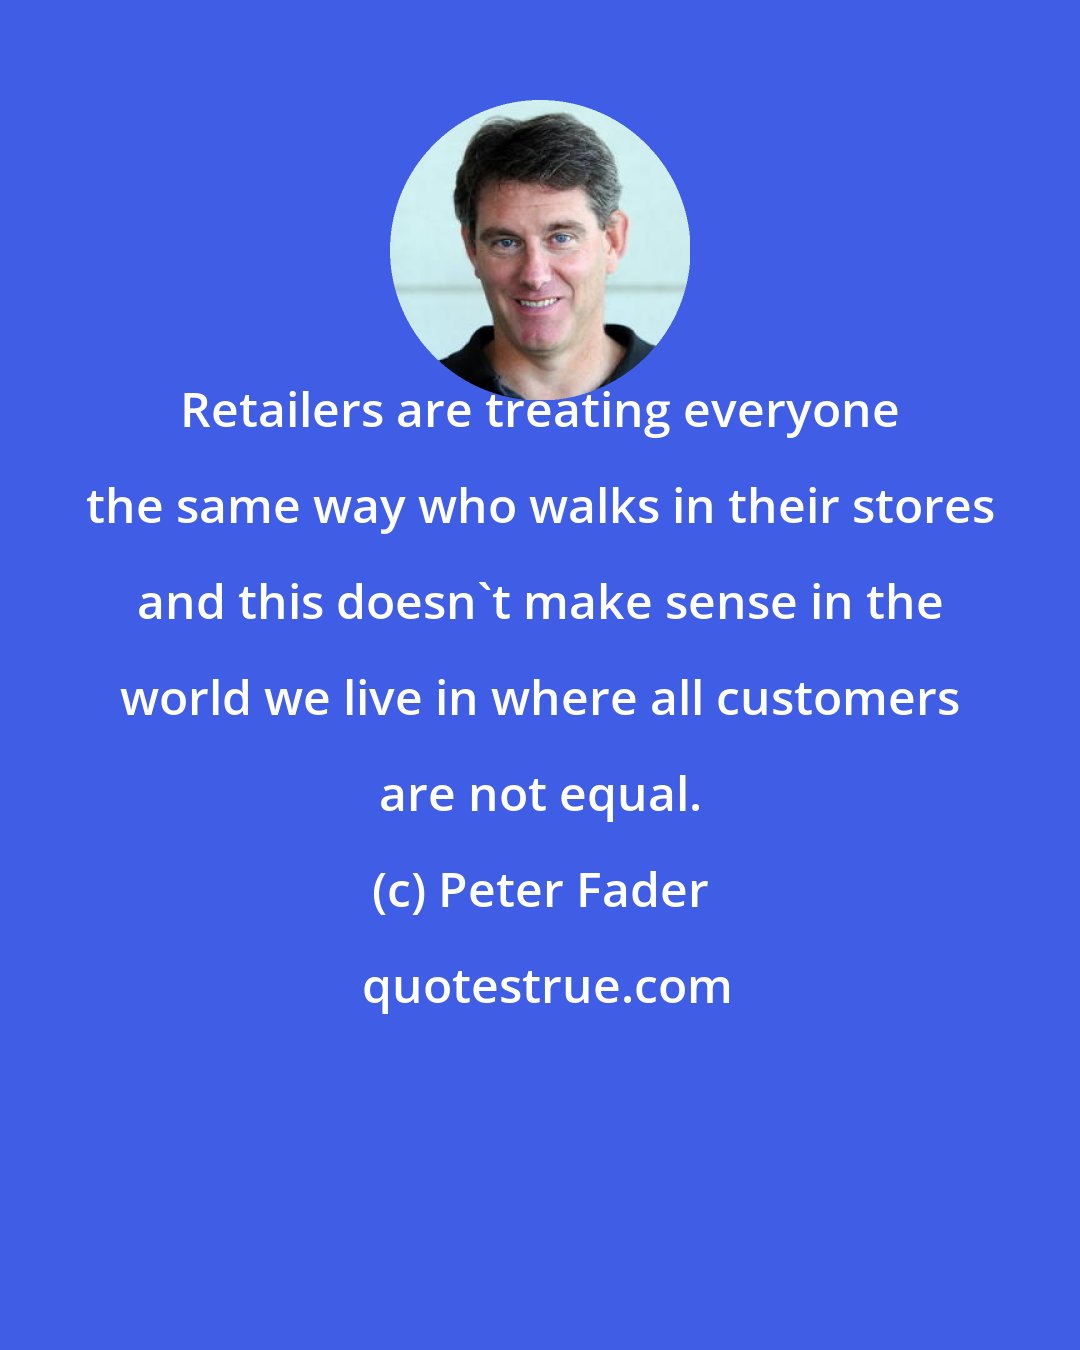 Peter Fader: Retailers are treating everyone the same way who walks in their stores and this doesn't make sense in the world we live in where all customers are not equal.